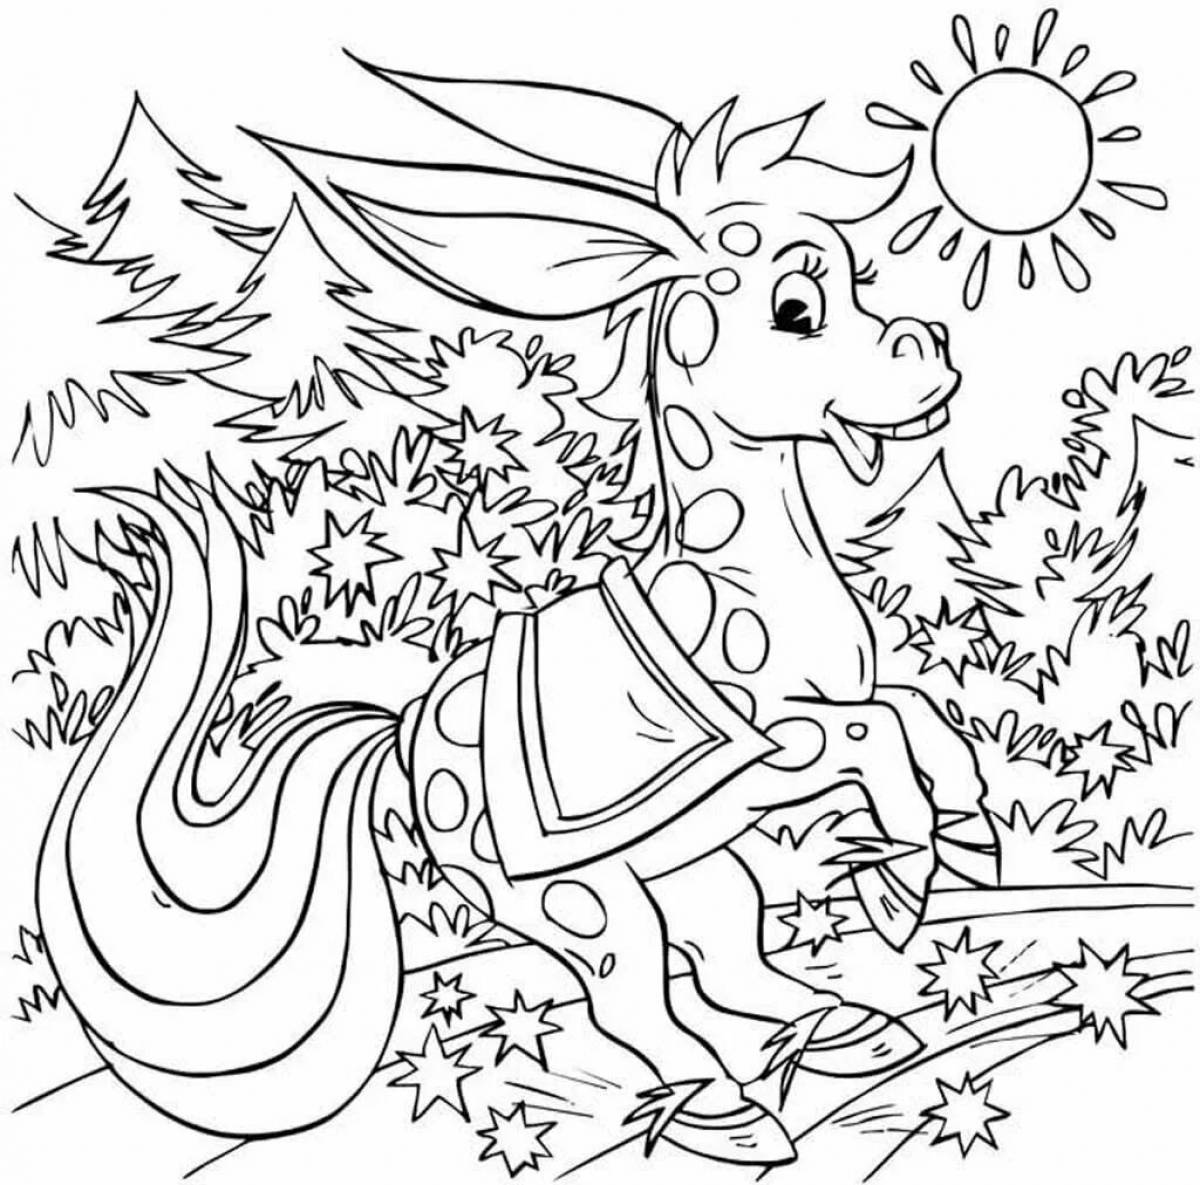 Humpbacked Horse coloring page with splashes of color